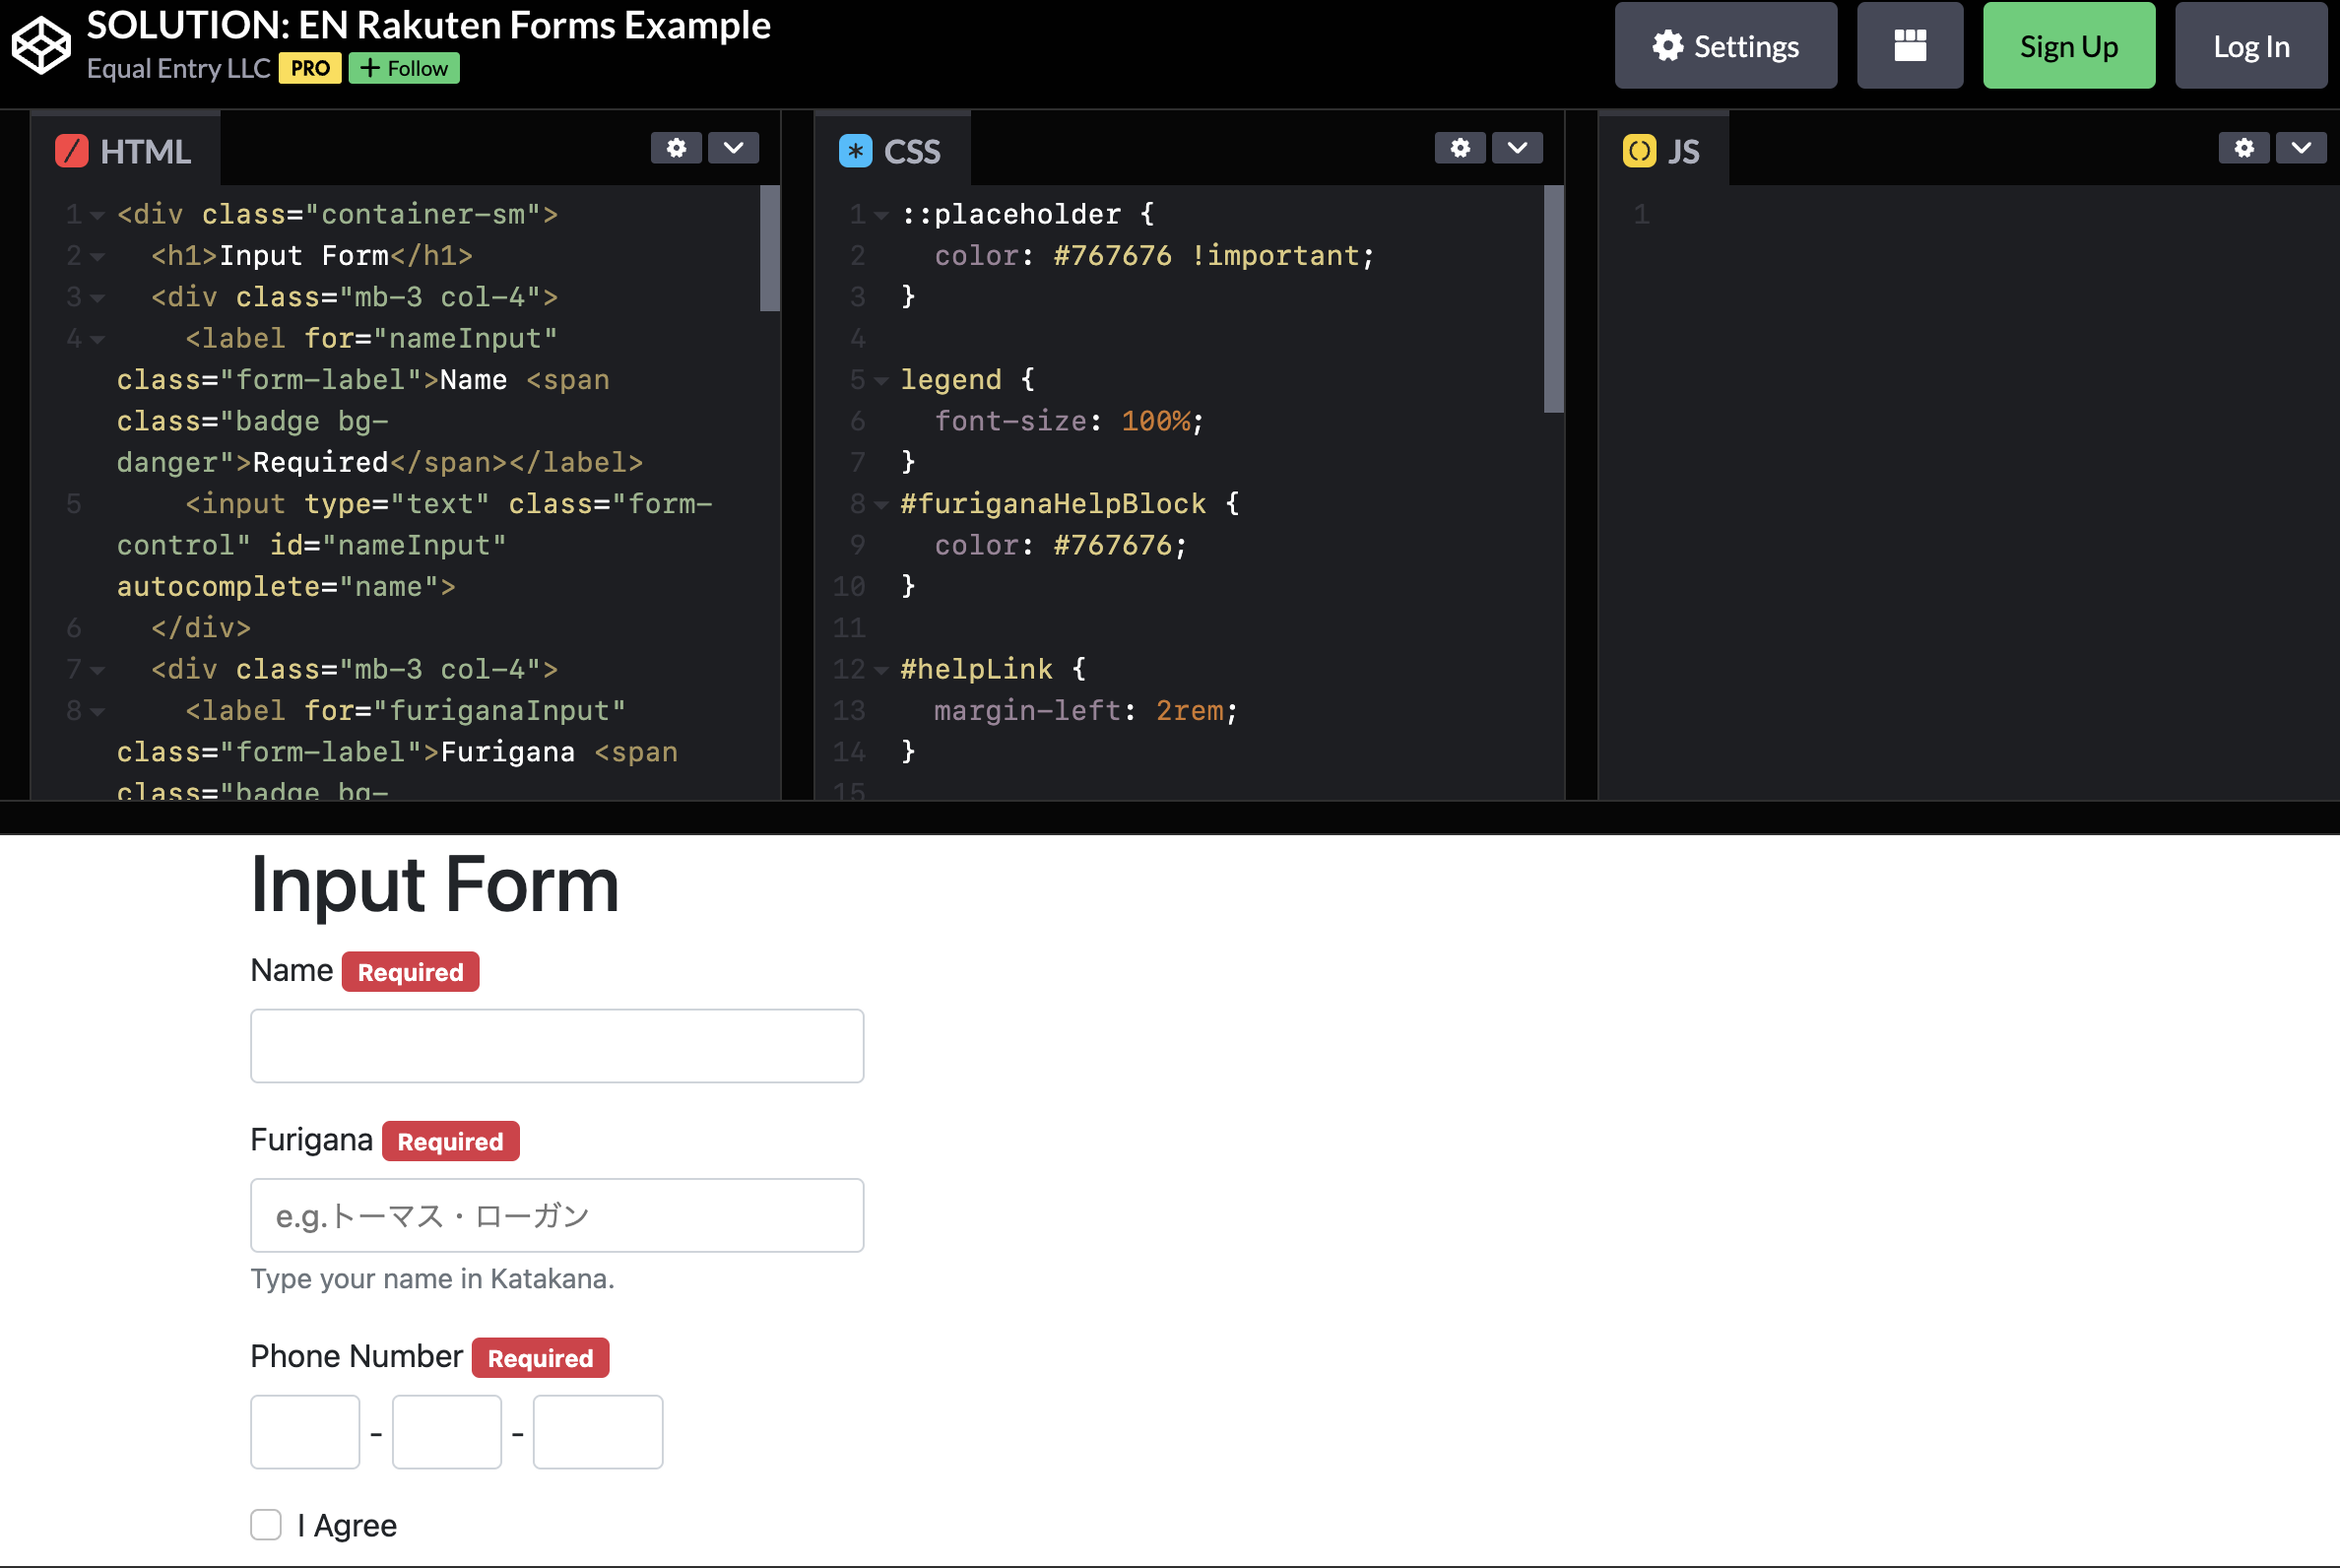 A screenshot of codepen.io showing an example input form and its HTML and CSS